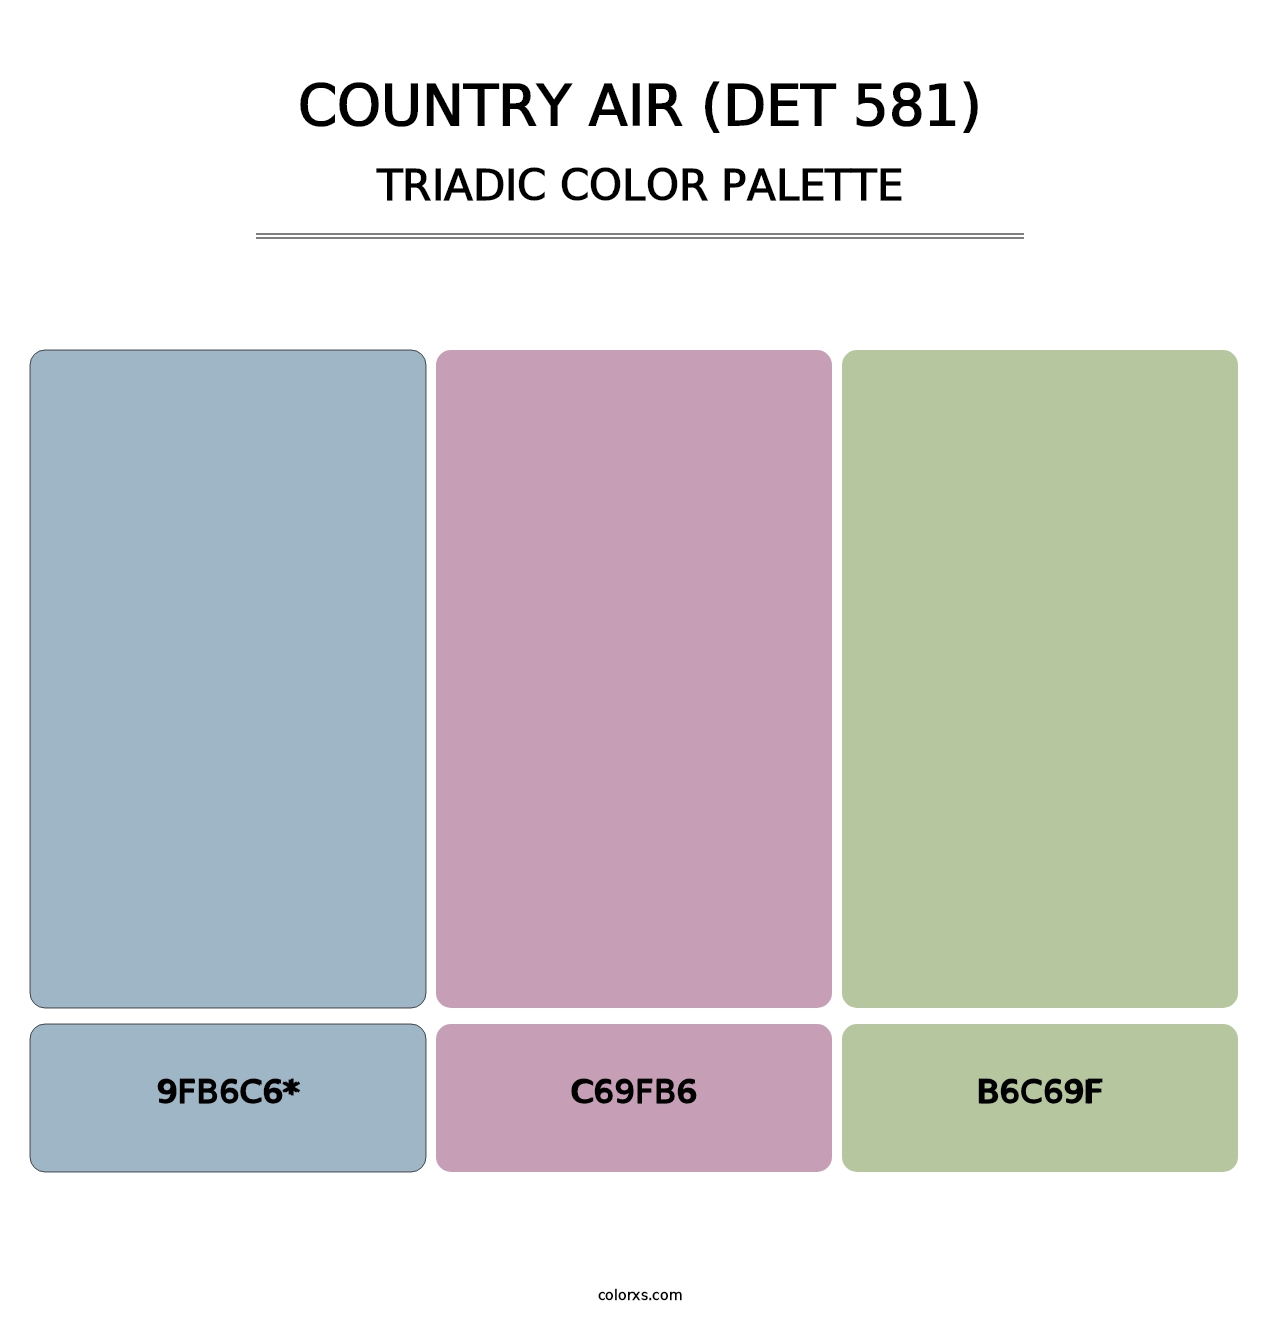 Country Air (DET 581) - Triadic Color Palette